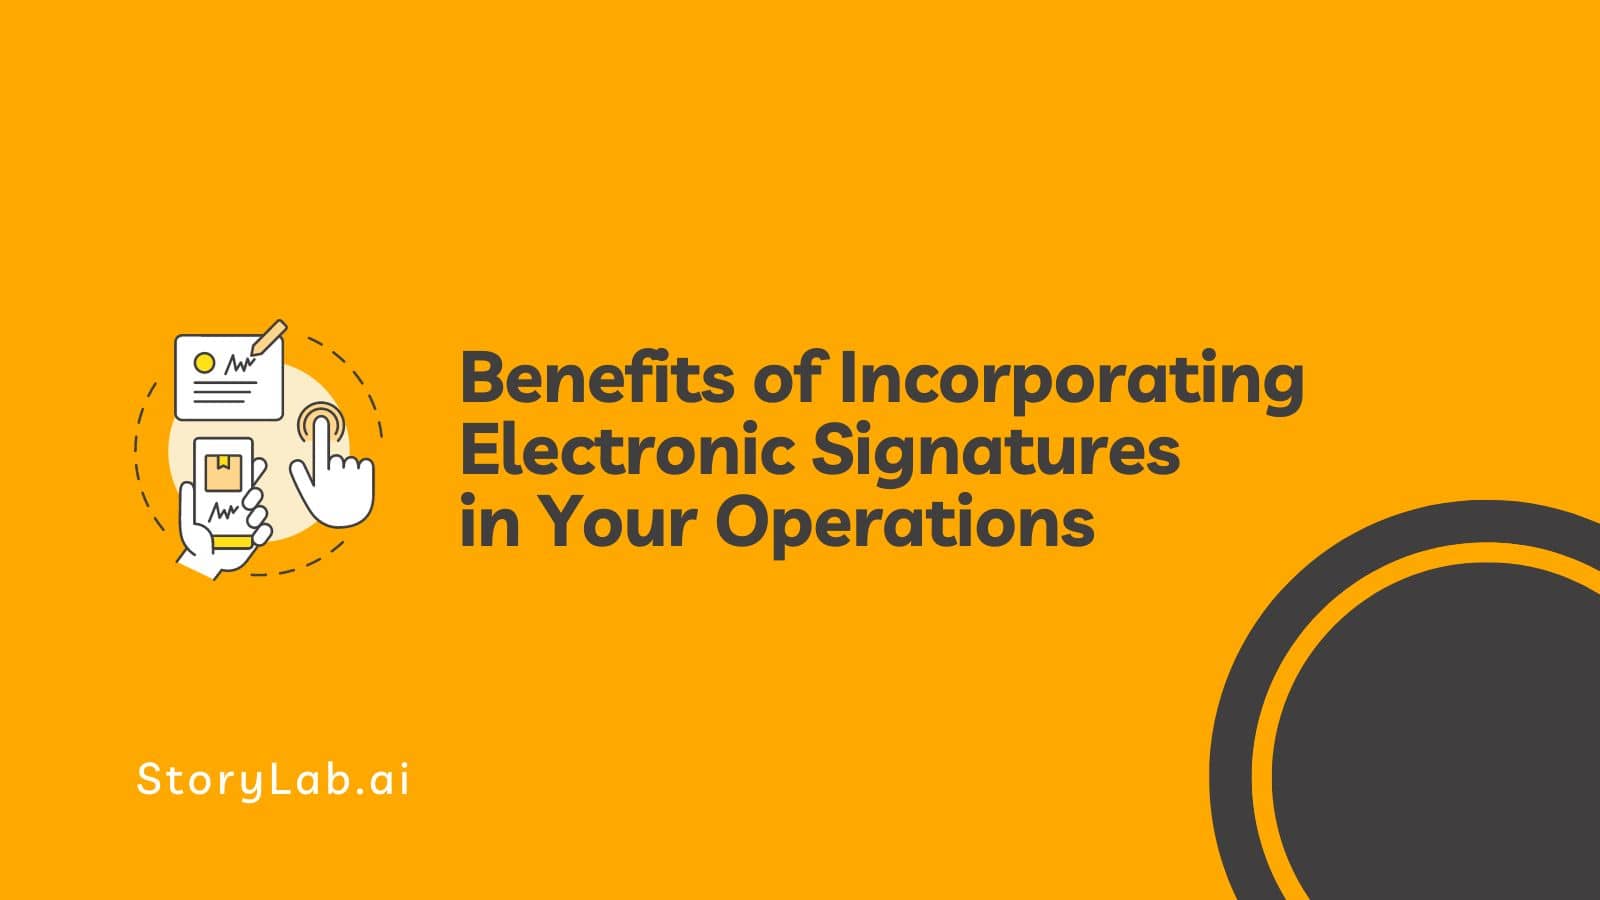 Benefits of Incorporating Electronic Signatures in Your Operations